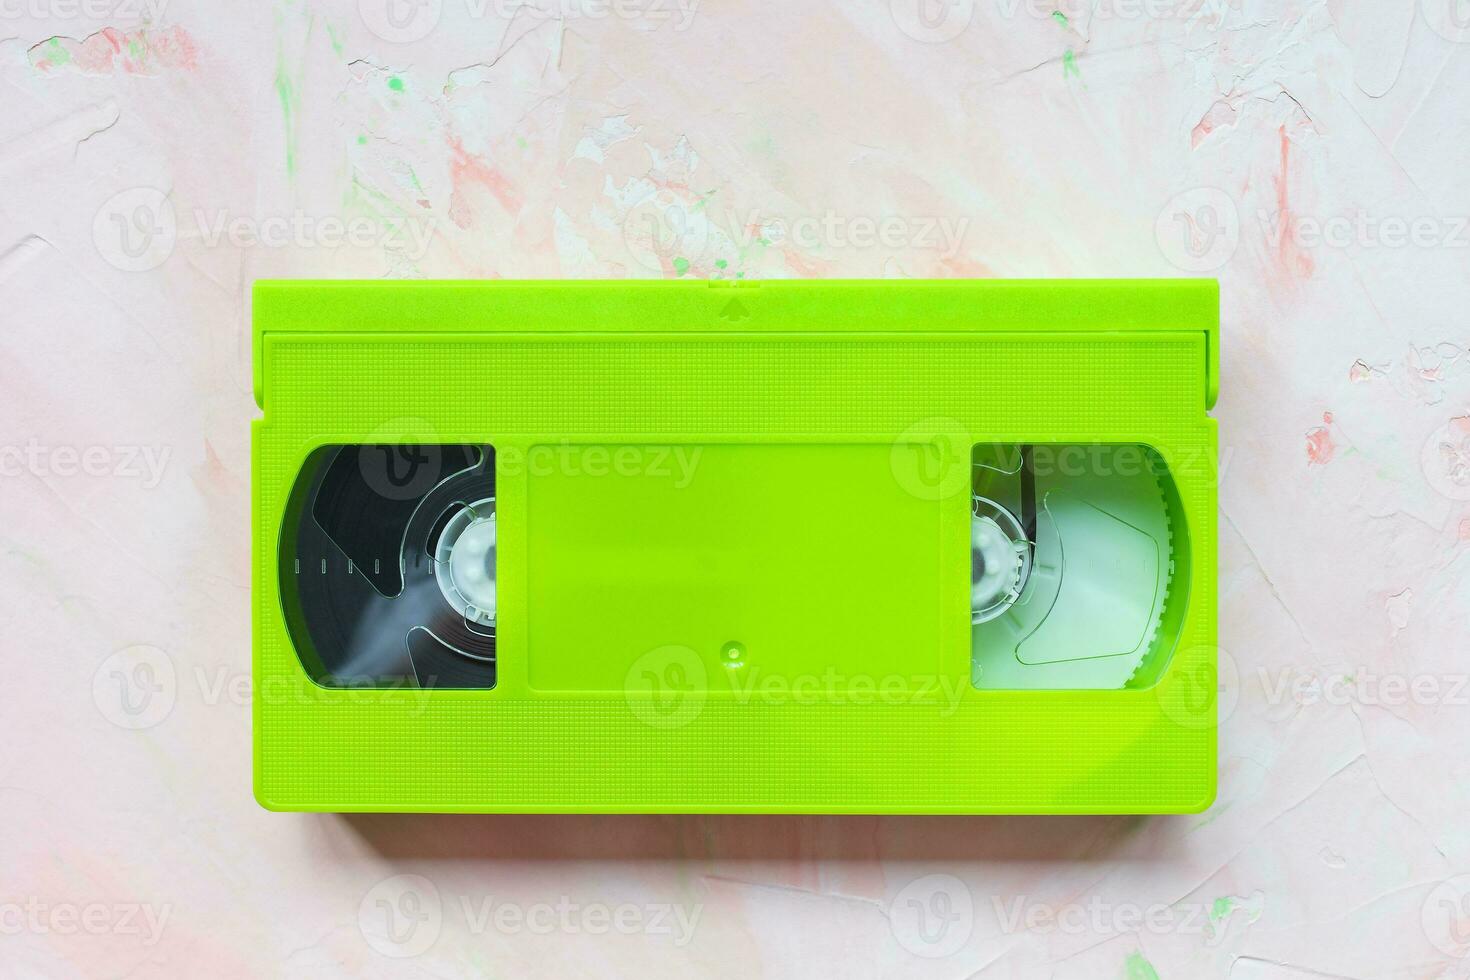 Green vintage VHS video tape on pink background photo